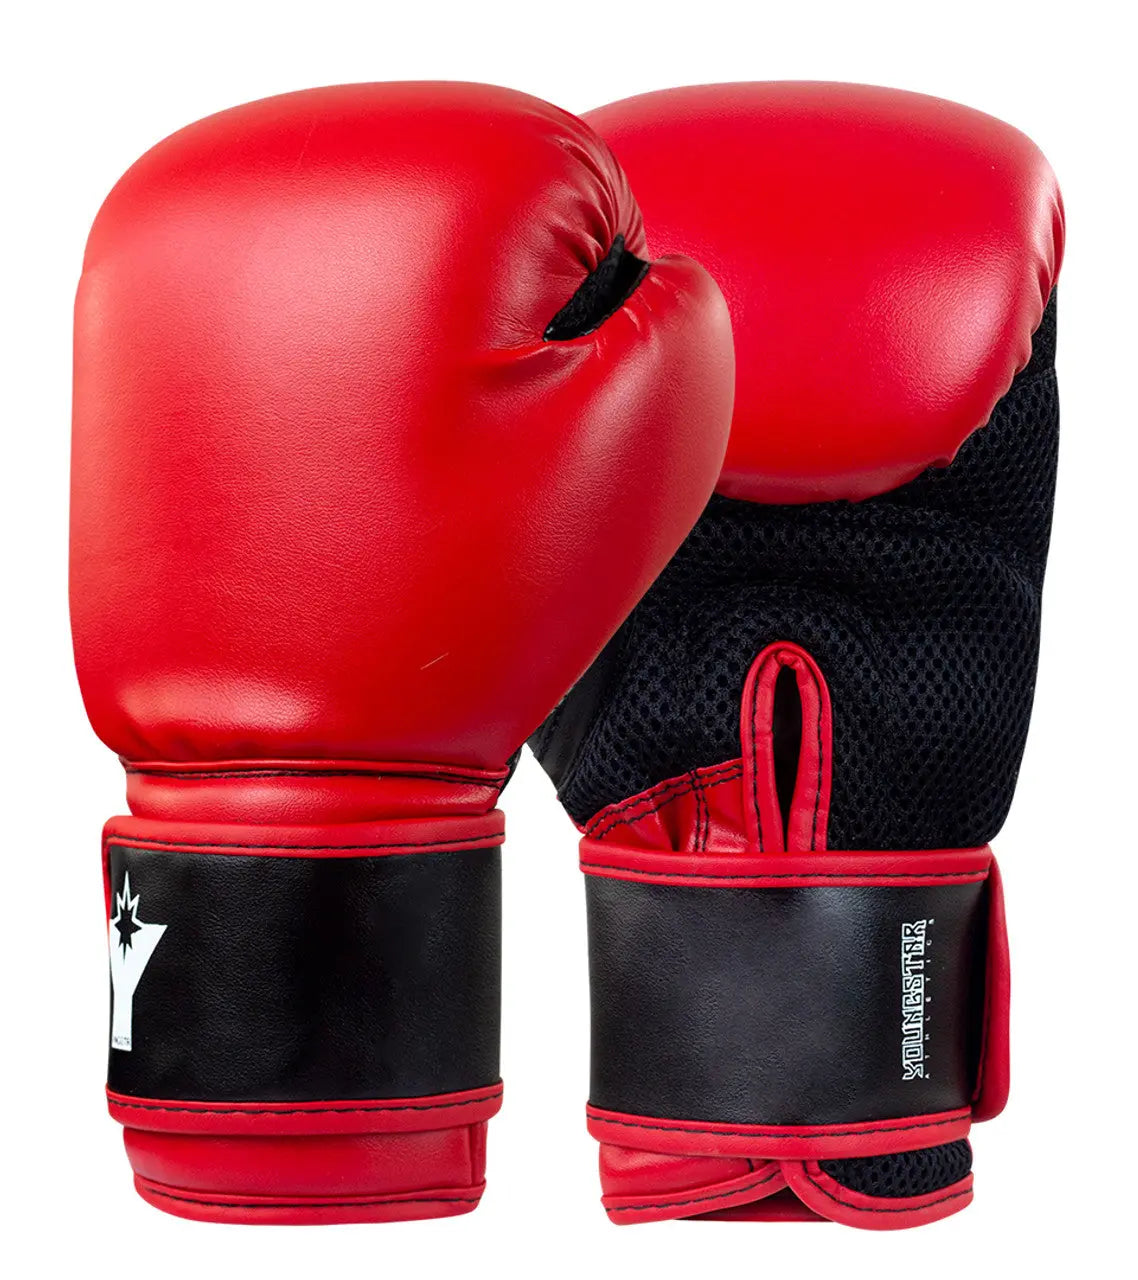 Youngstar 6oz. Youth Boxing Gloves - Prime combats YOUNGSTAR  Training Gloves